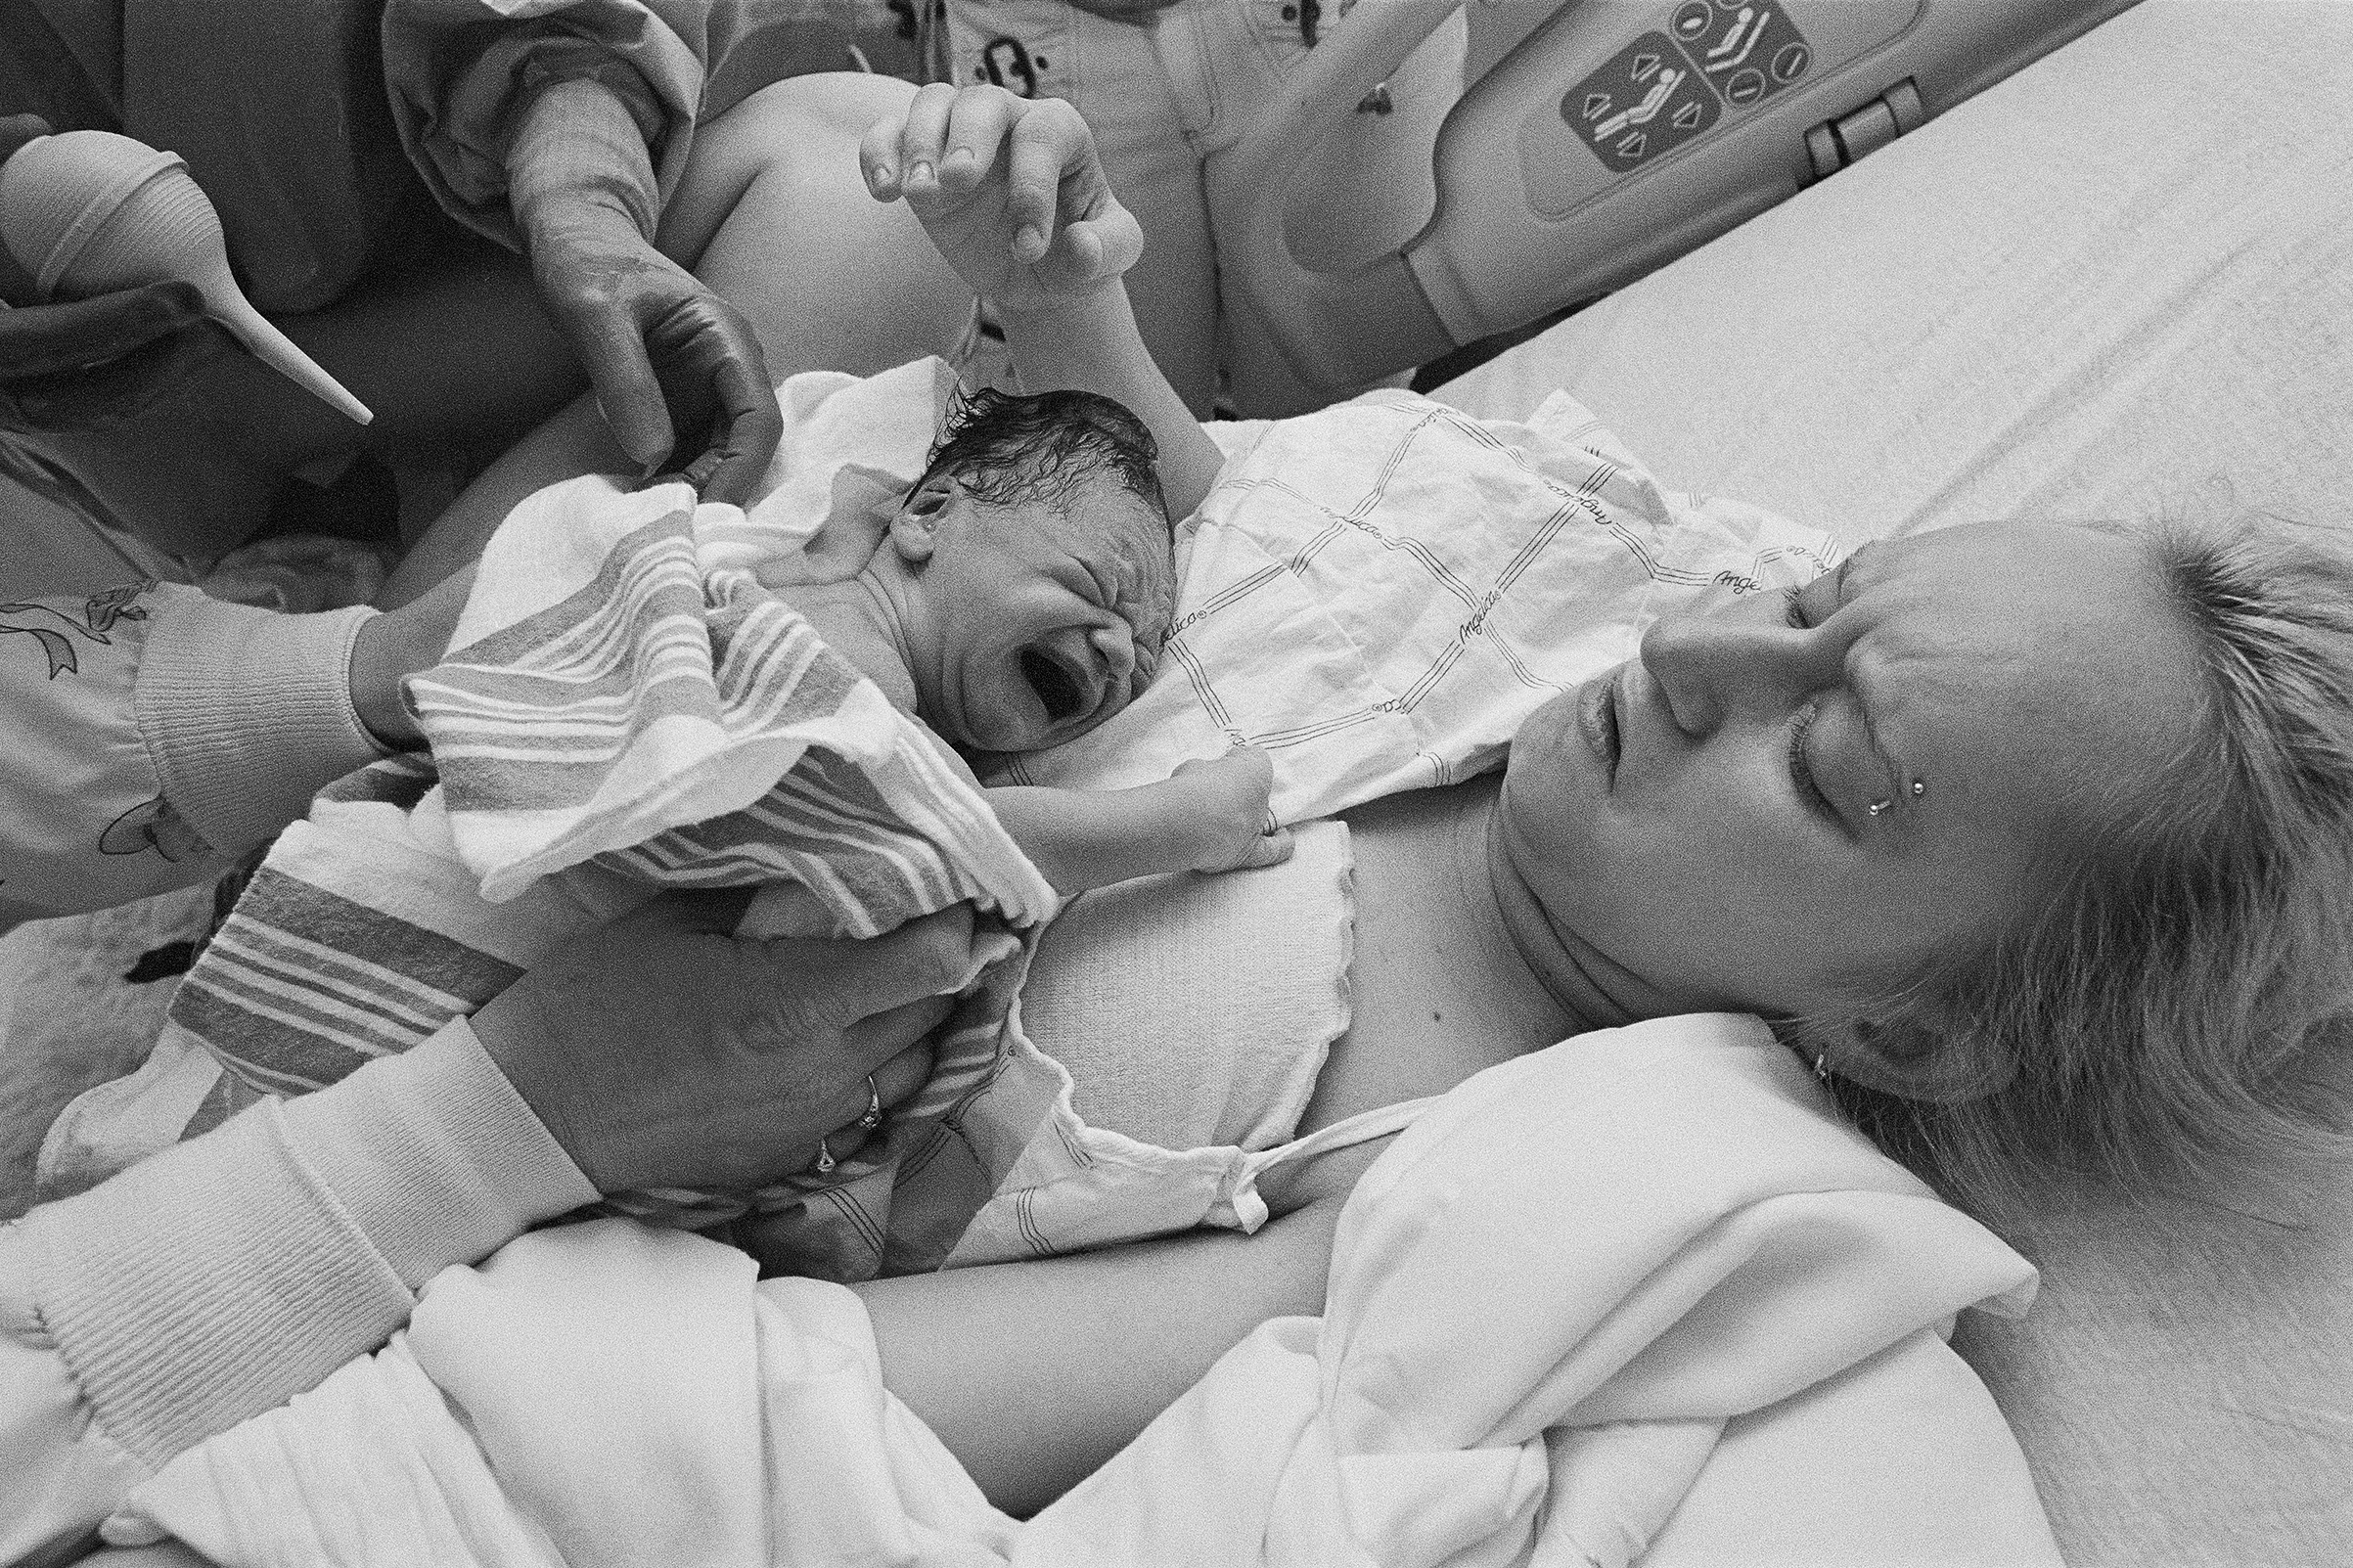 Kayla Stocklas, 14 years old, giving birth to her son Tony in Troy, N.Y., on April 18, 2004. "He was named after her girlfriend Sabrina's father," says Kenneally, "who was serving a nineteen-year prison sentence." (Brenda Ann Kenneally)